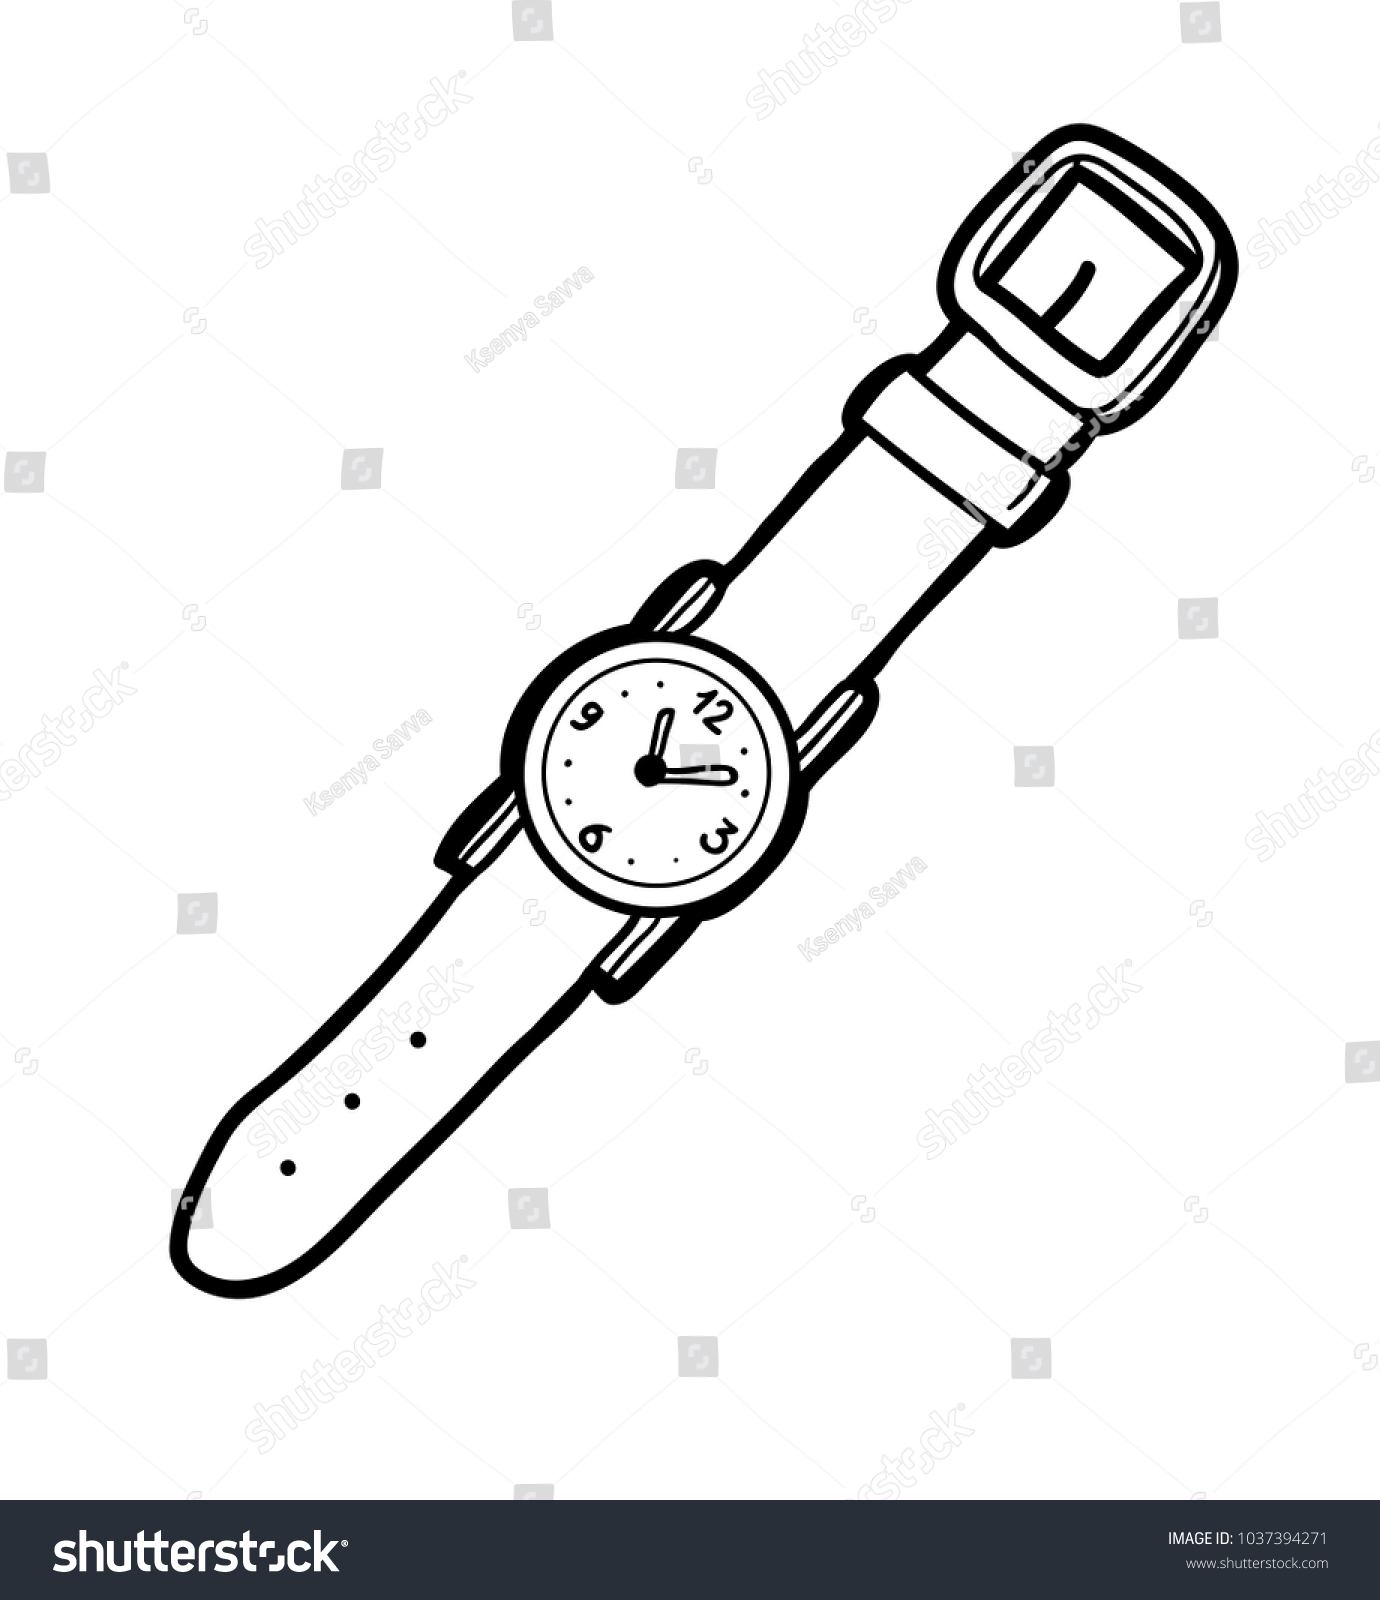 Coloring book children wrist watch stock vector royalty free